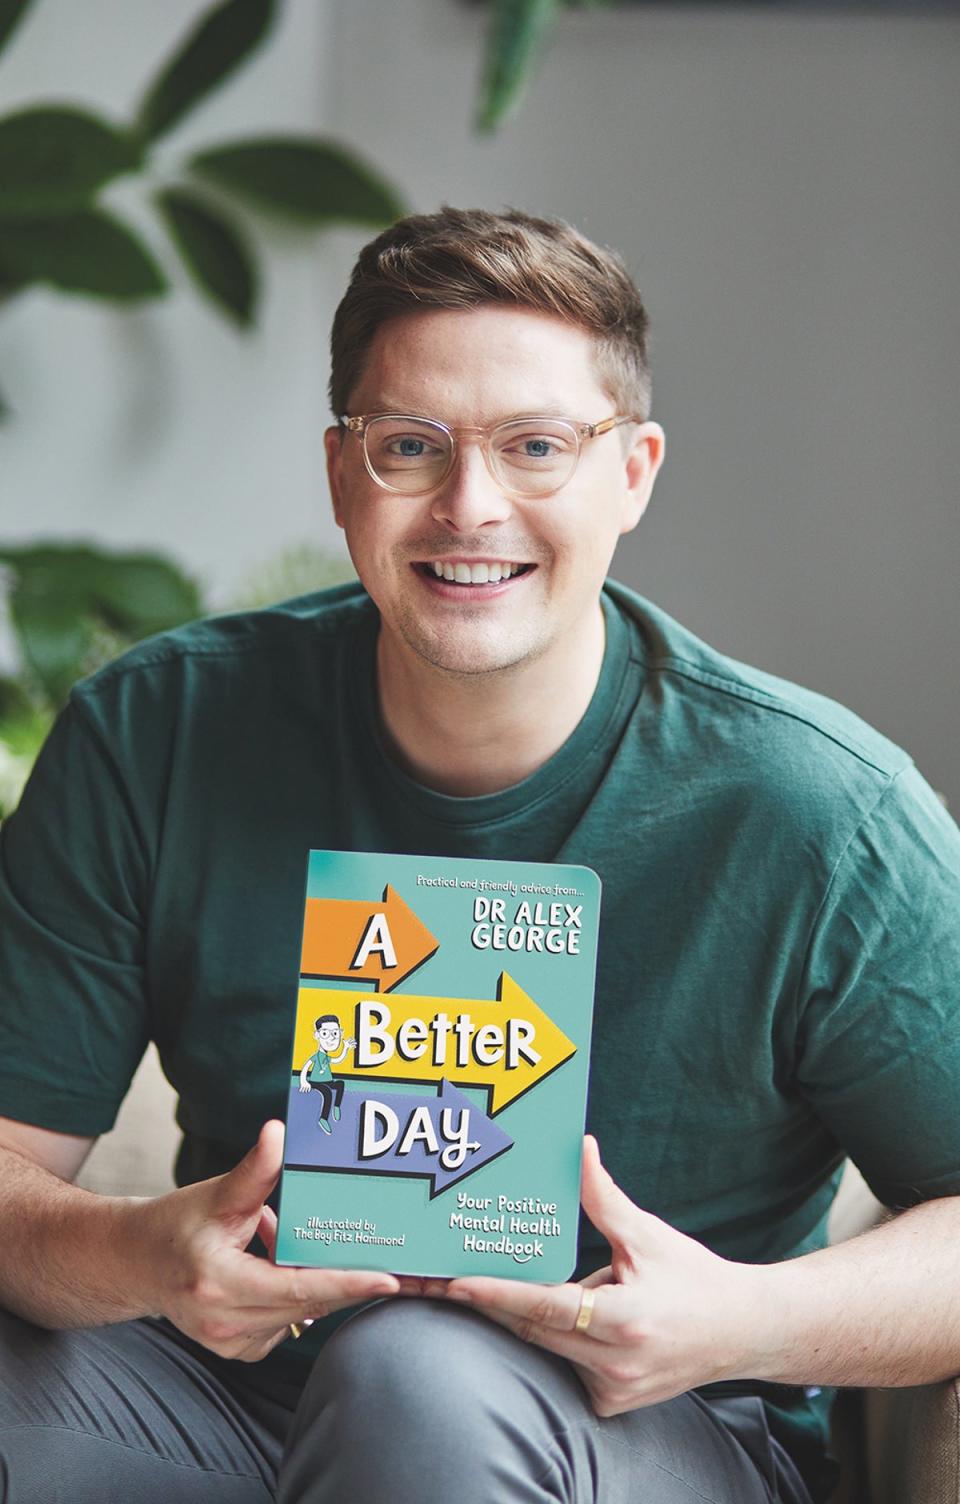 Dr Alex George with his new book ‘A Better Day’ (Supplied)